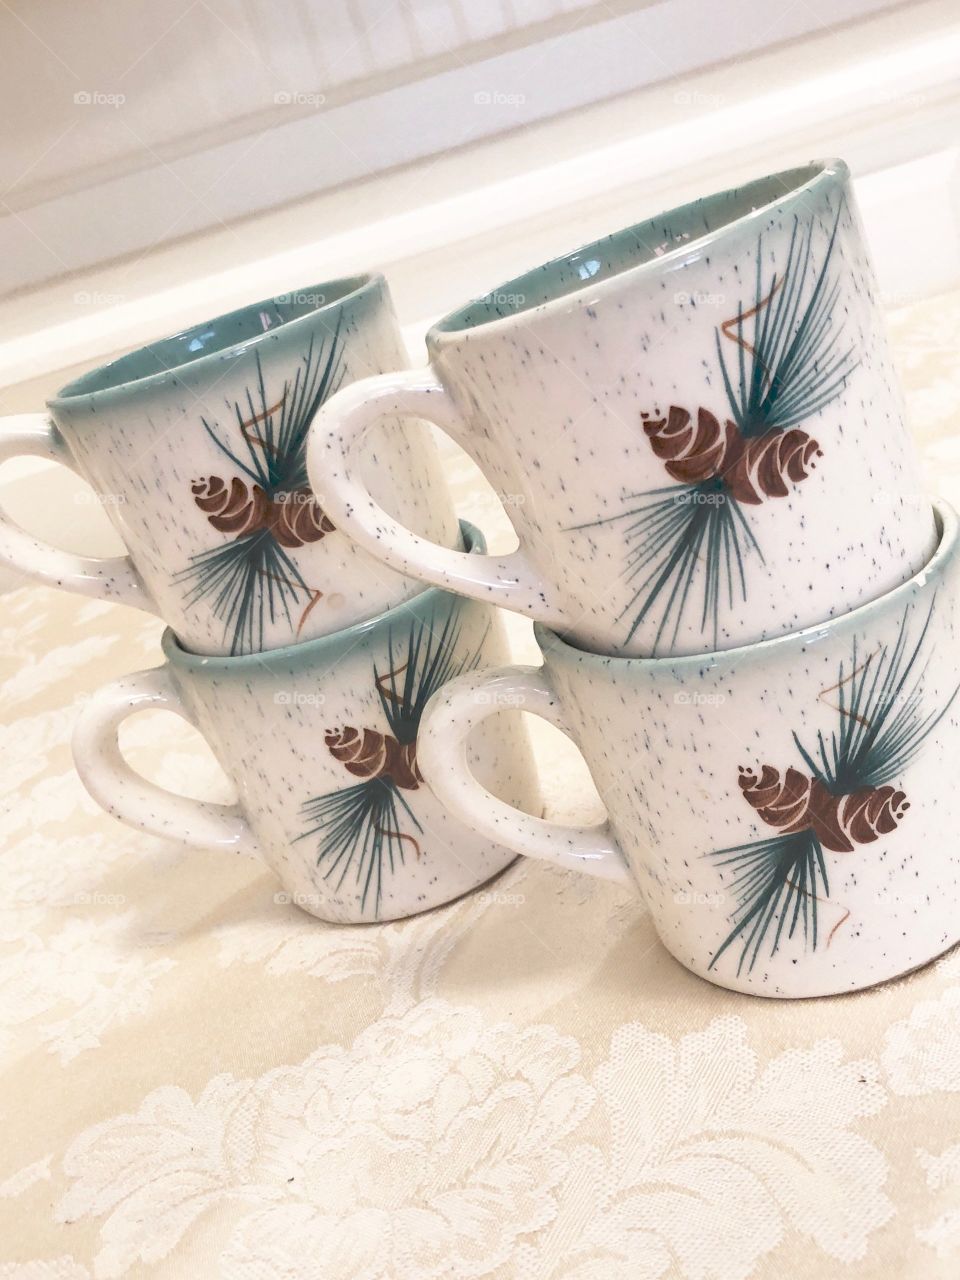 70s Pine Cone Comfort Mugs Hand Painted Turquoise Inside And Detail Vintage Speckled Mugs 